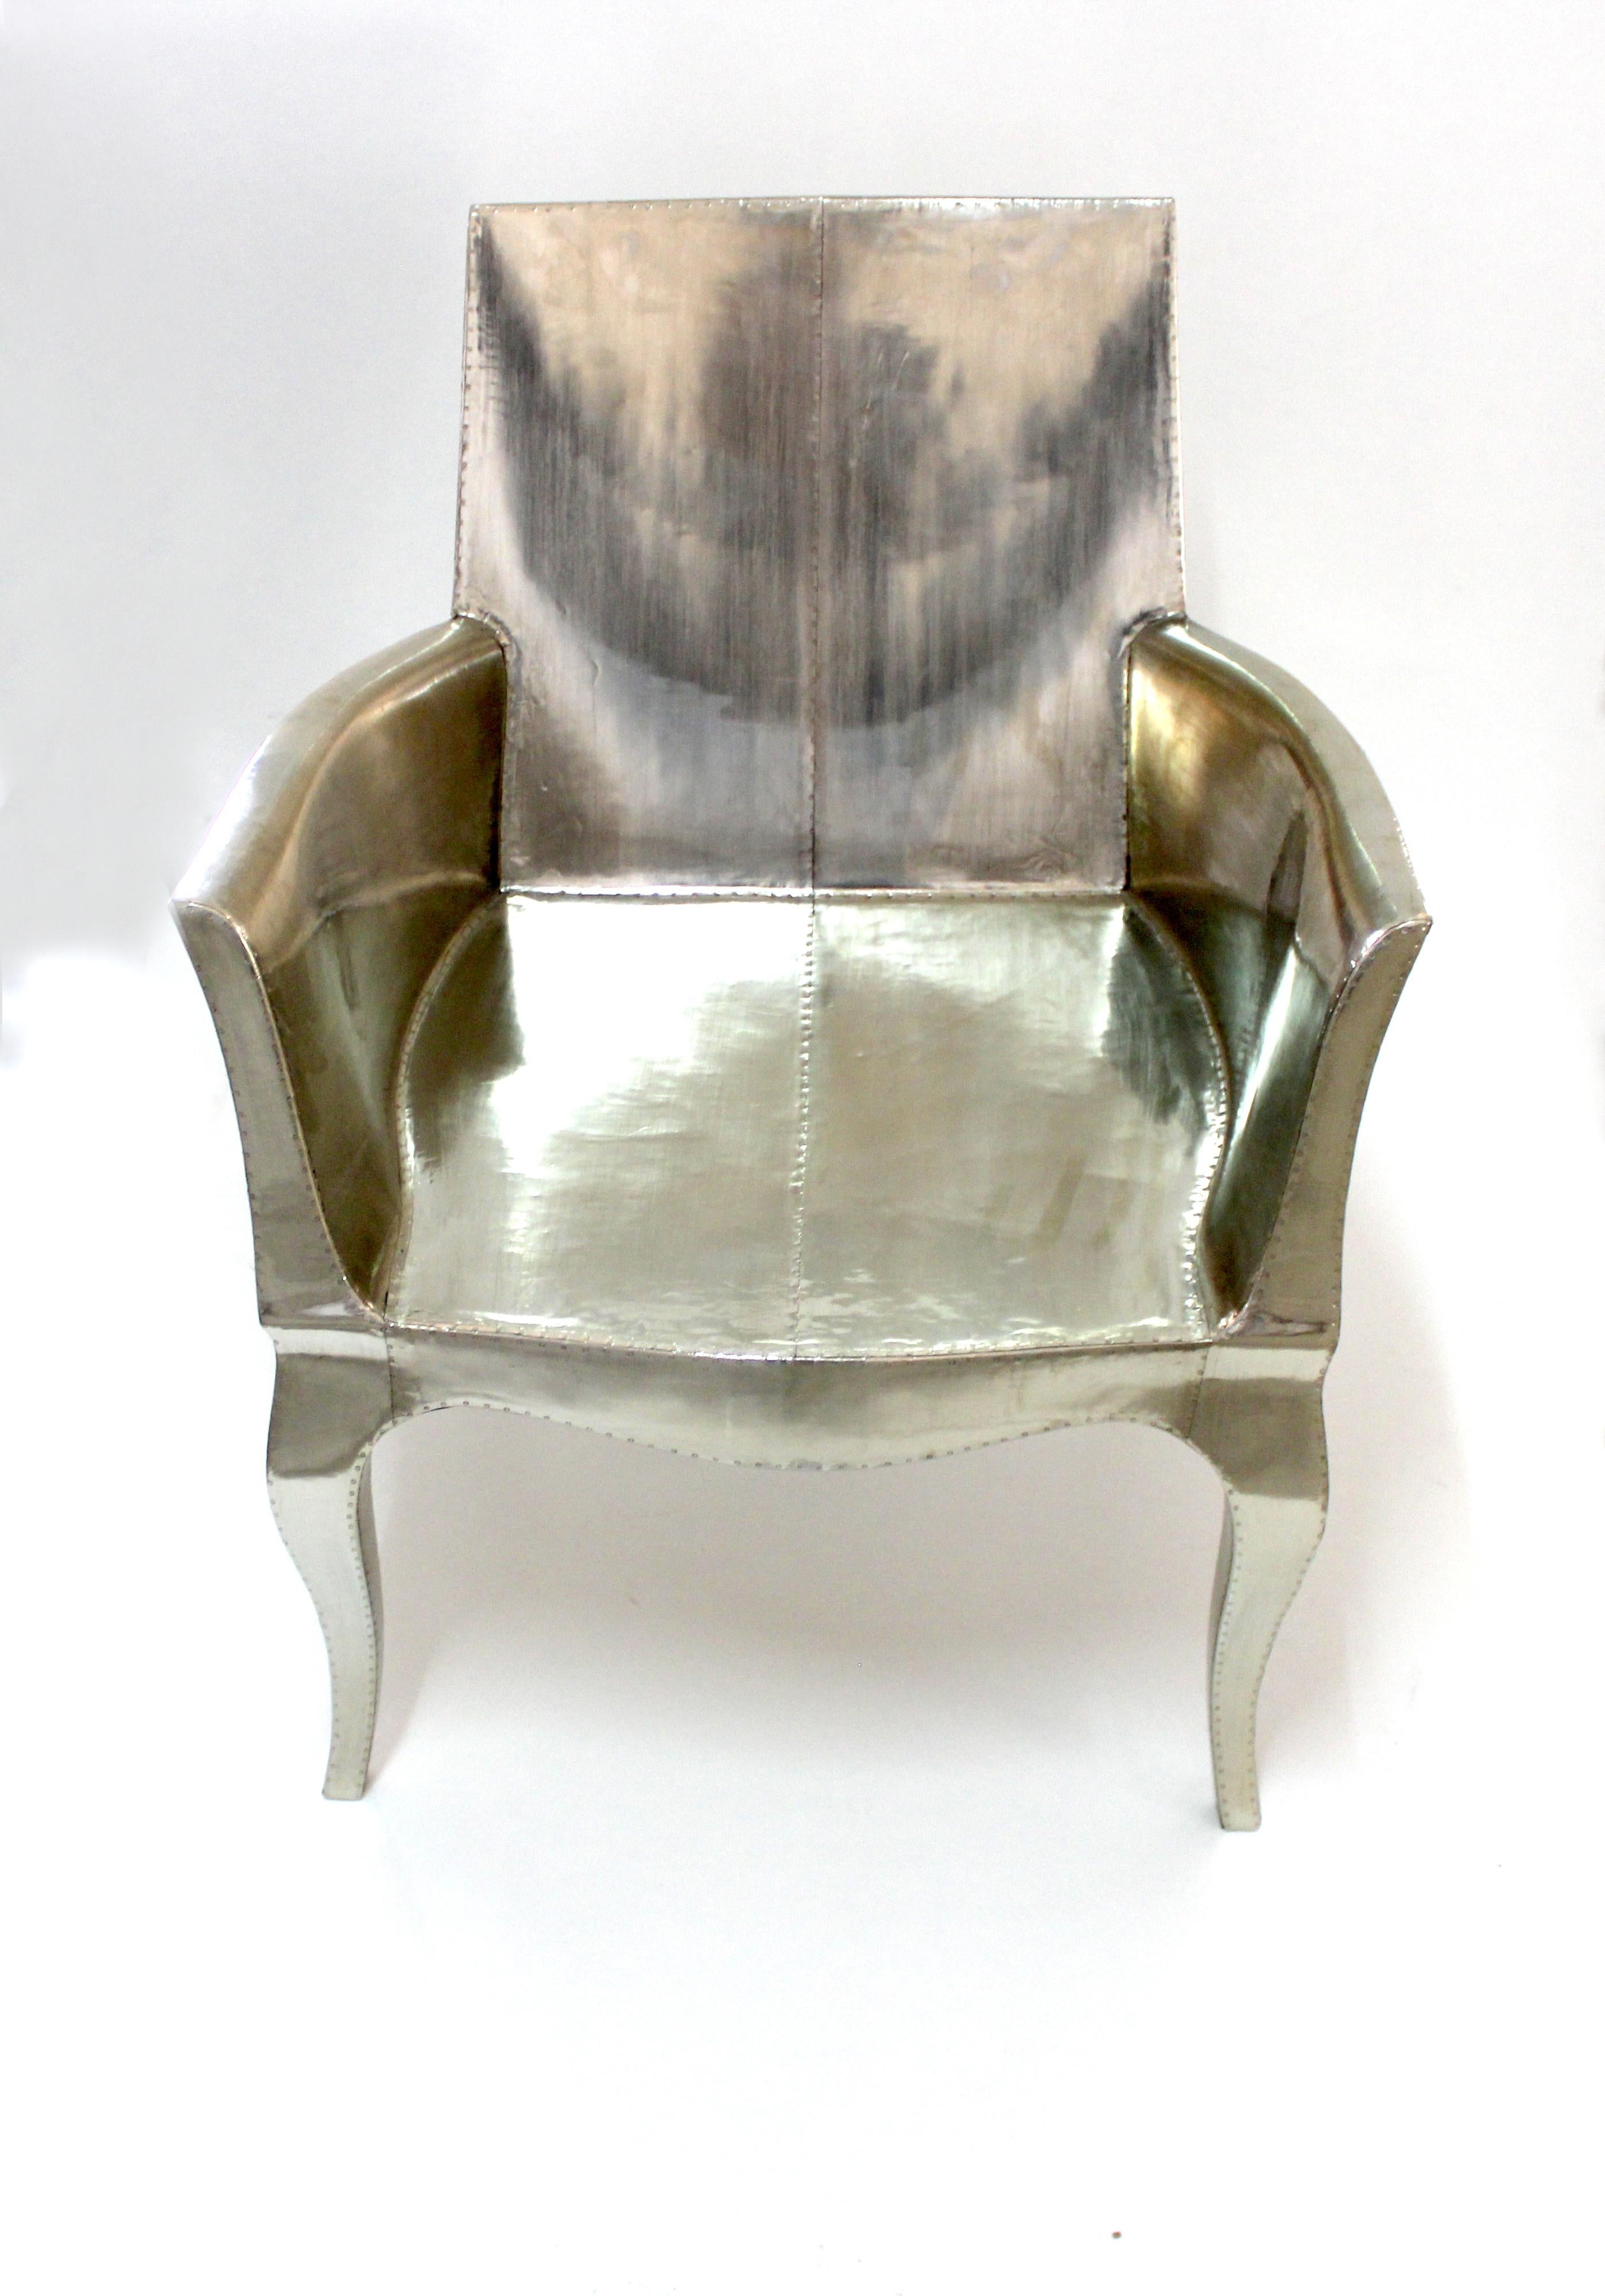 Other Art Deco Chair Styles Chairs in Smooth White by Paul Mathieu for S. Odegard For Sale